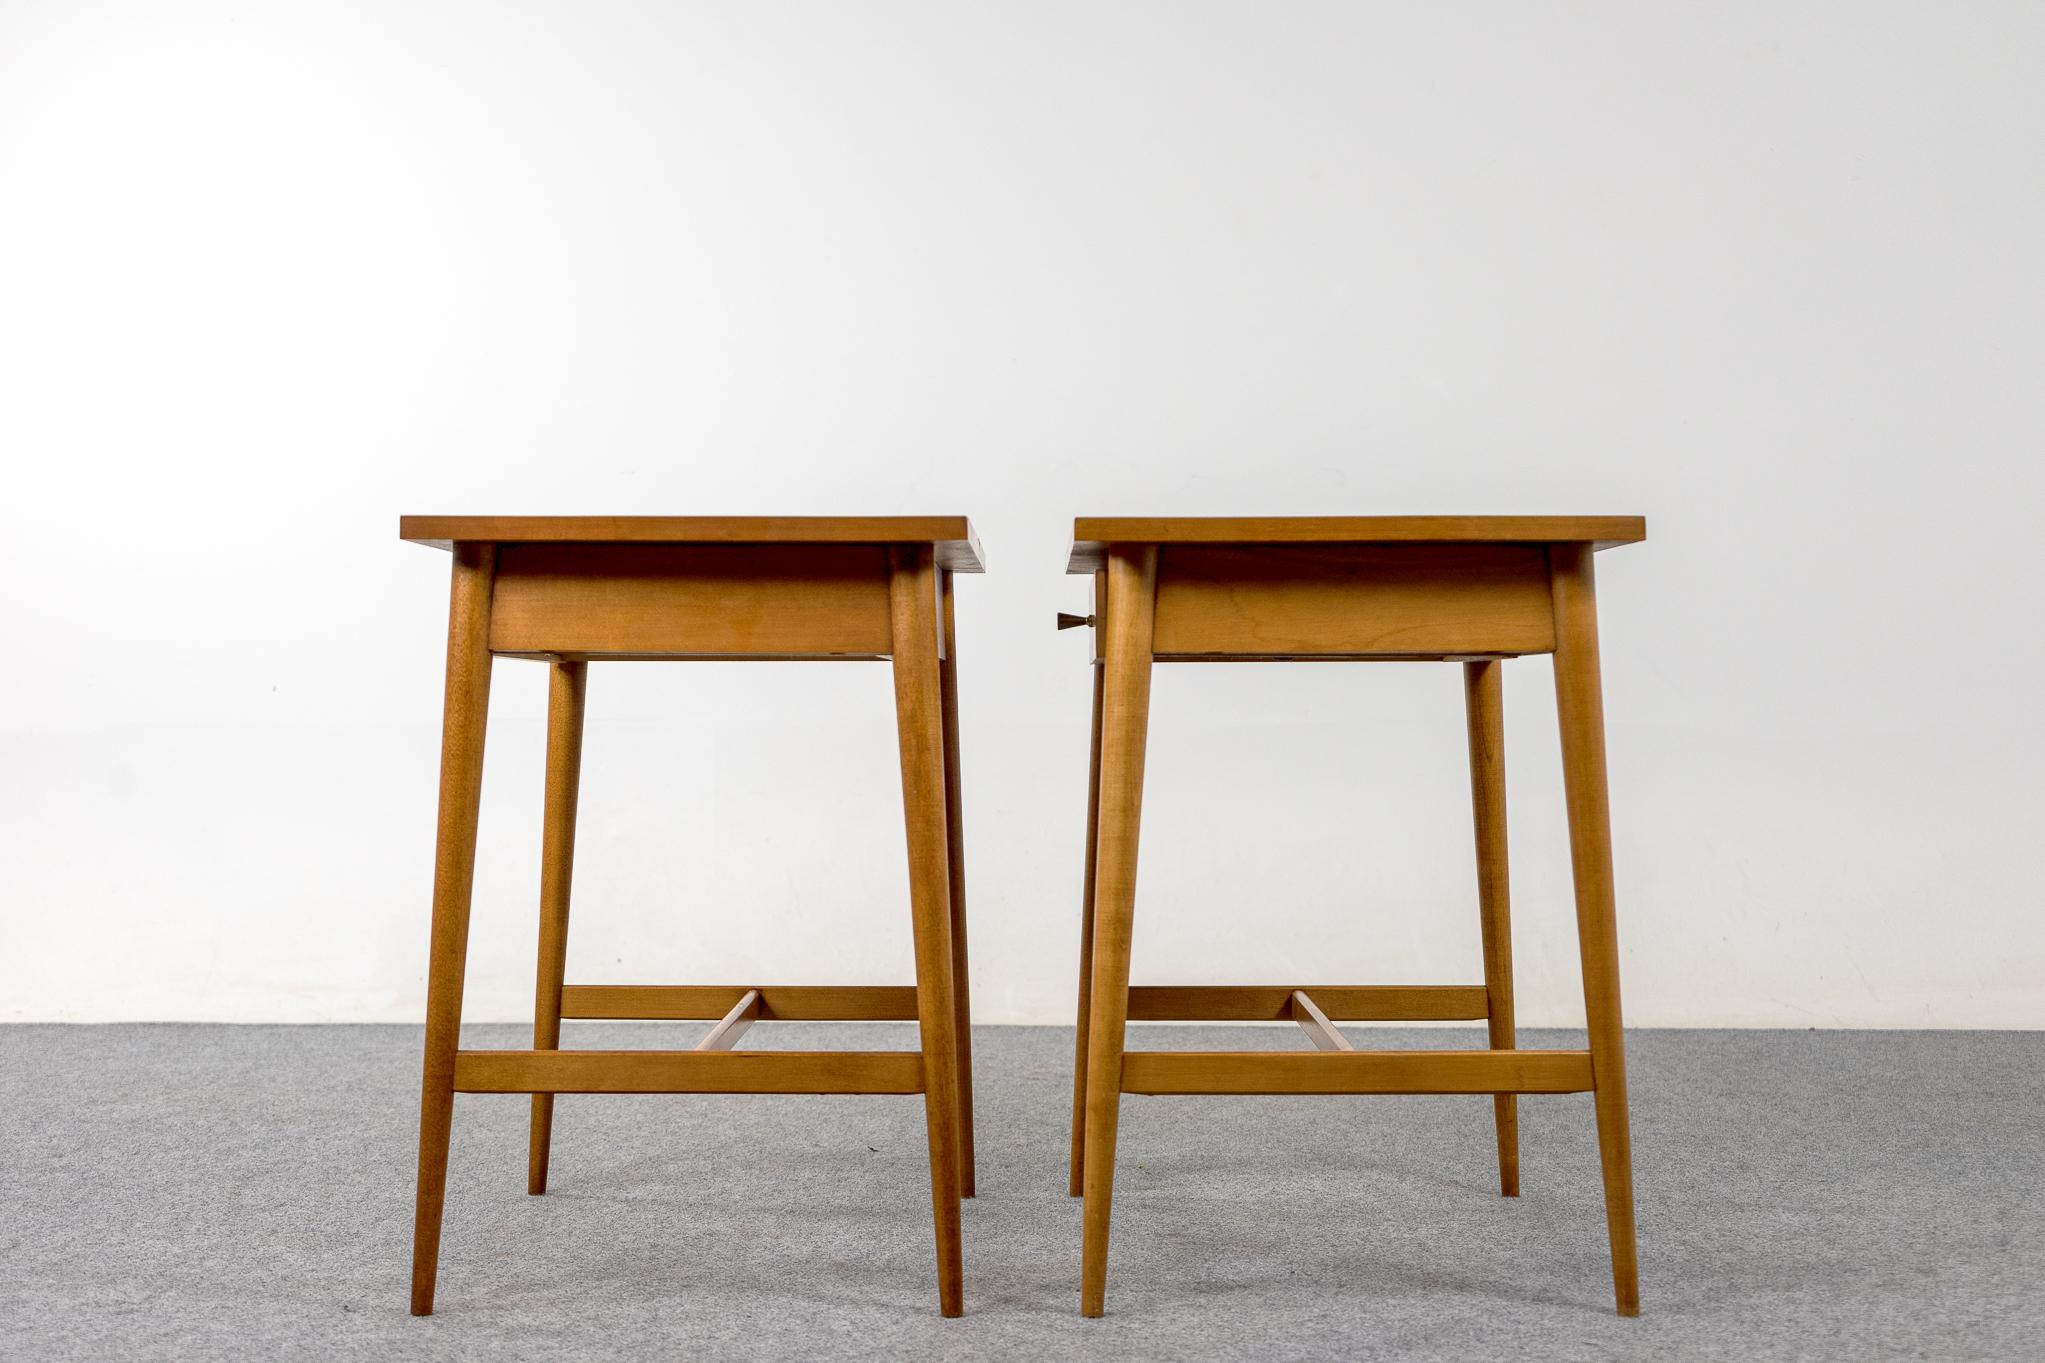 Maple Bedside Table Pair, by Paul McCobb 1